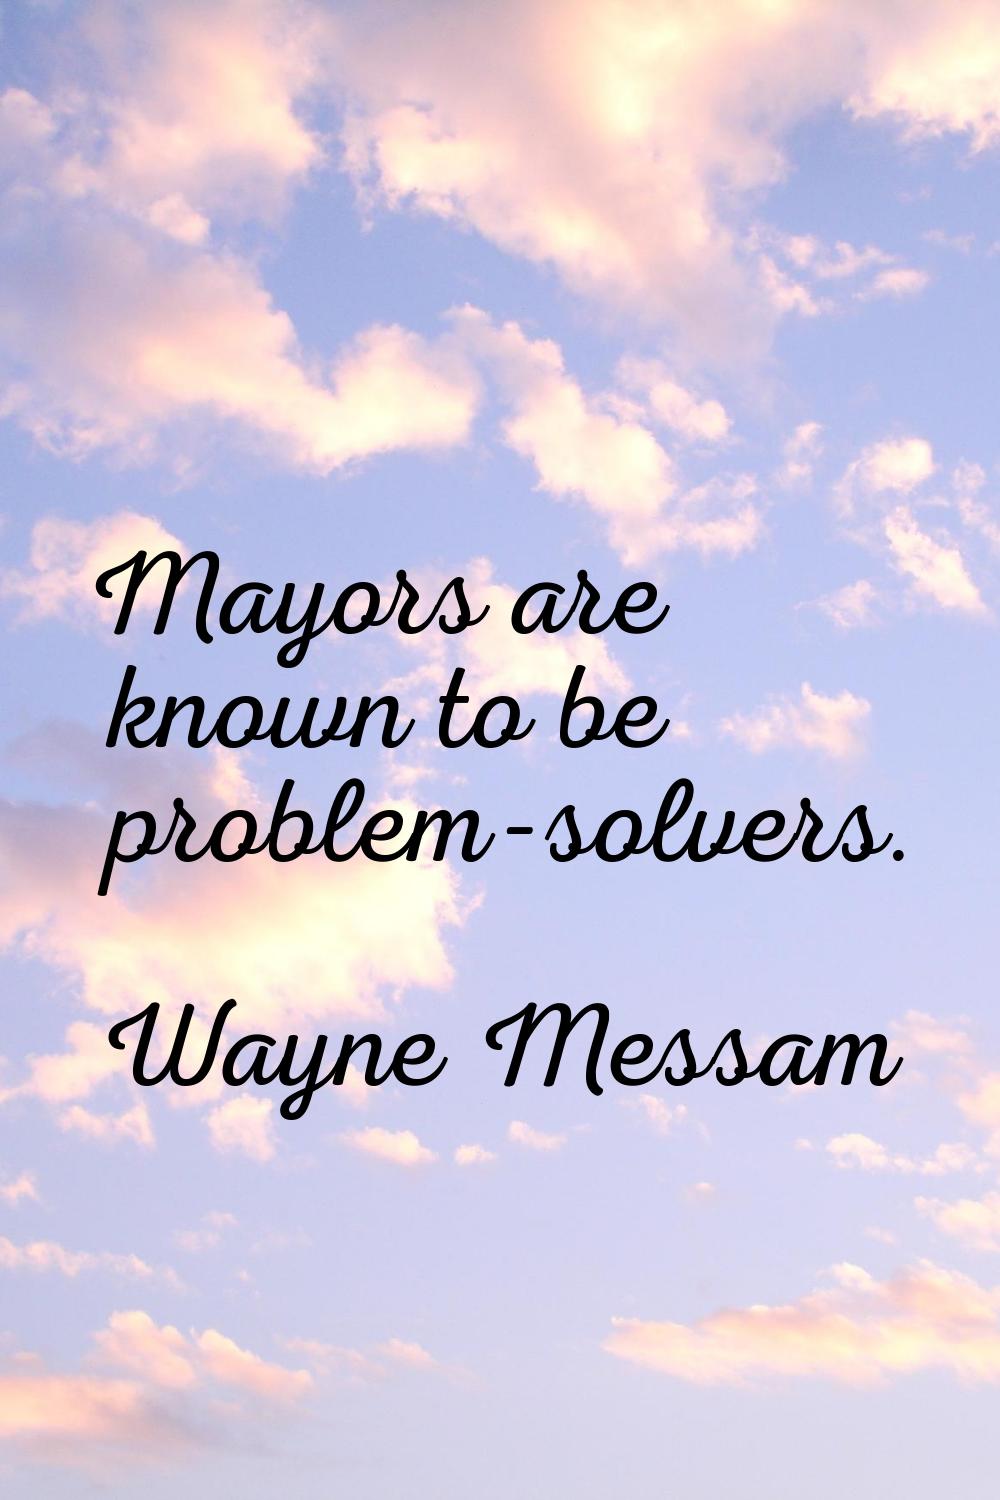 Mayors are known to be problem-solvers.